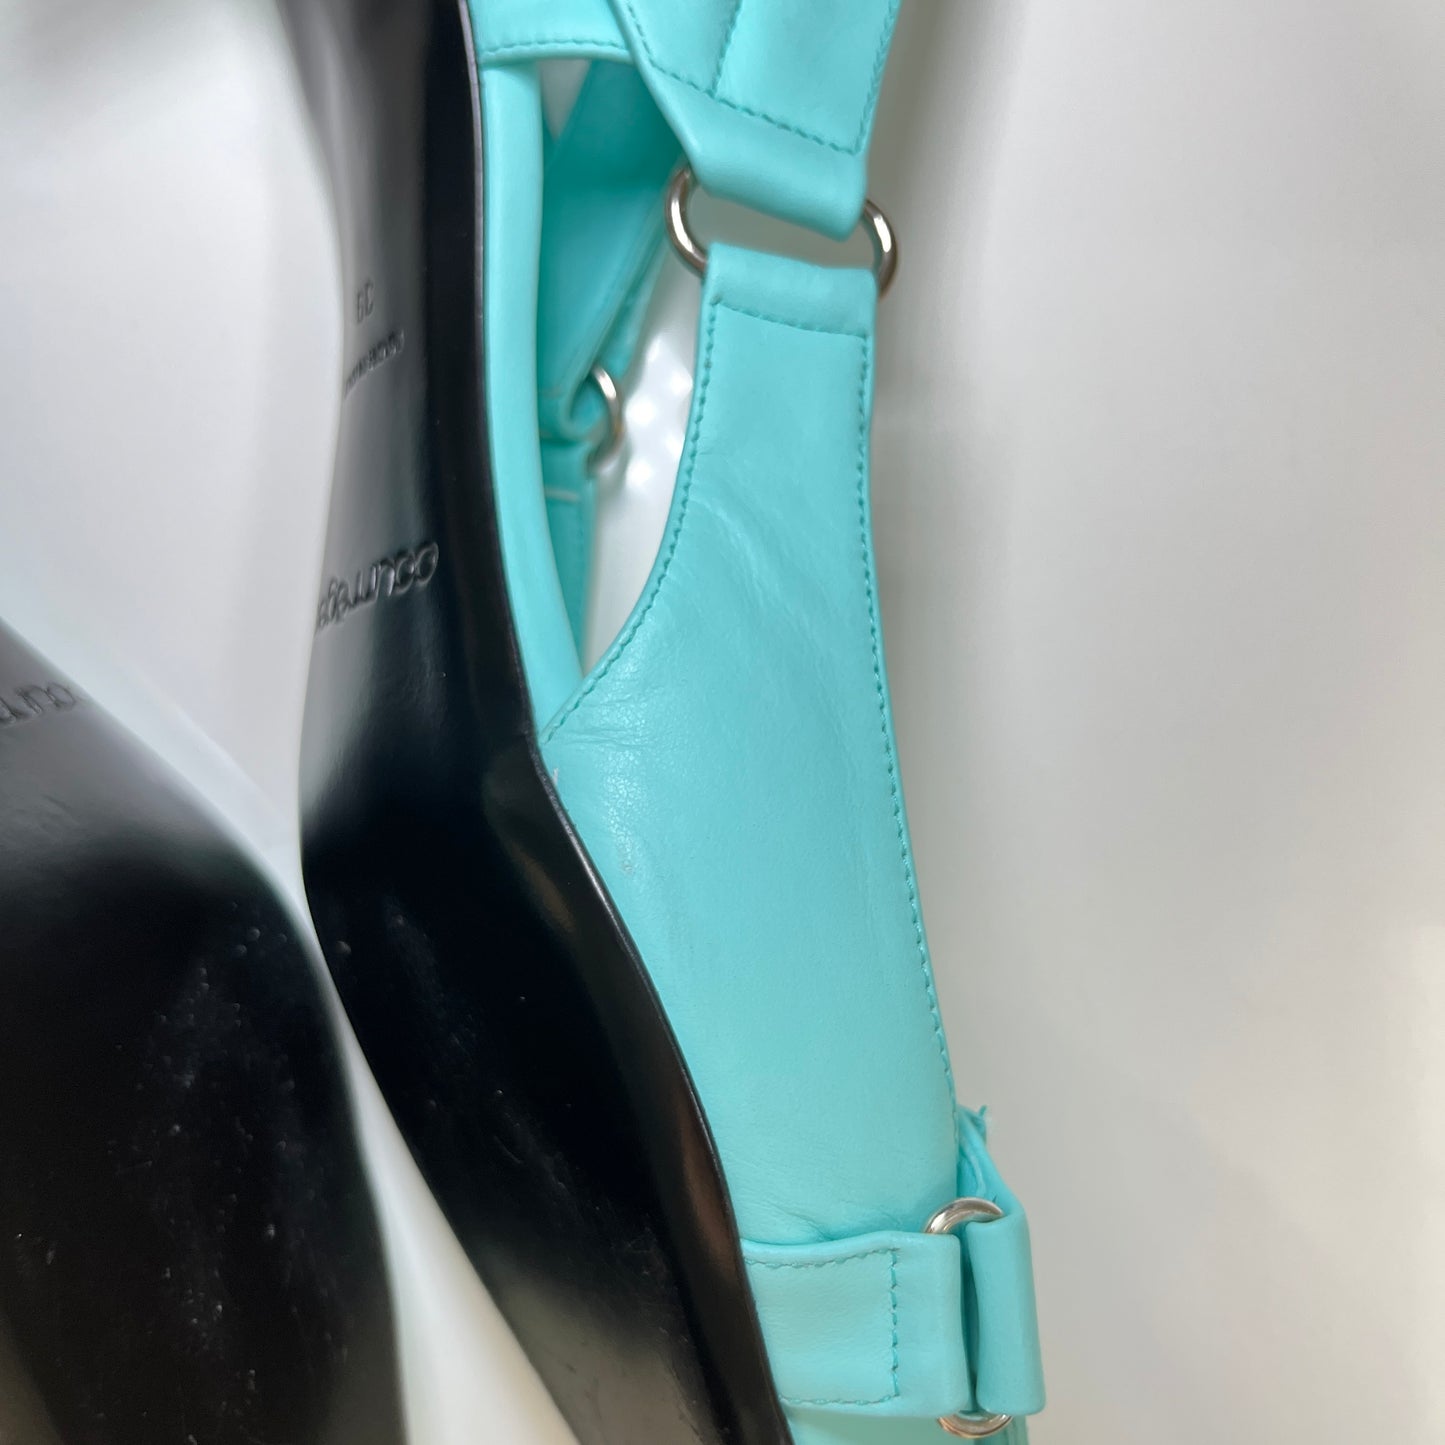 Courreges Leather Slingback Pump in Turquoise